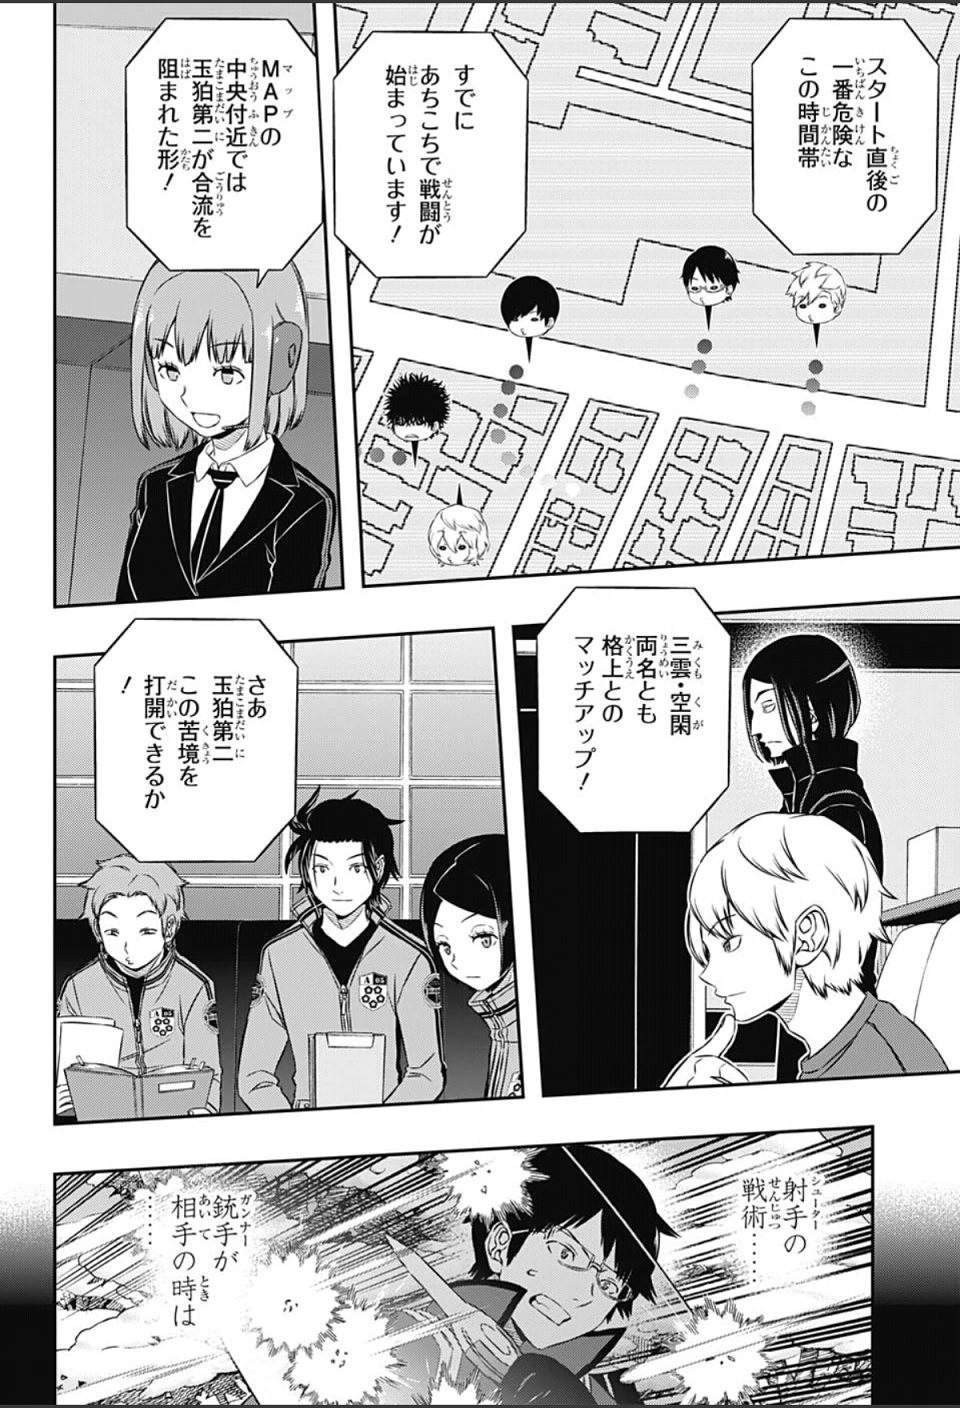 World Trigger - Chapter 112 - Page 4